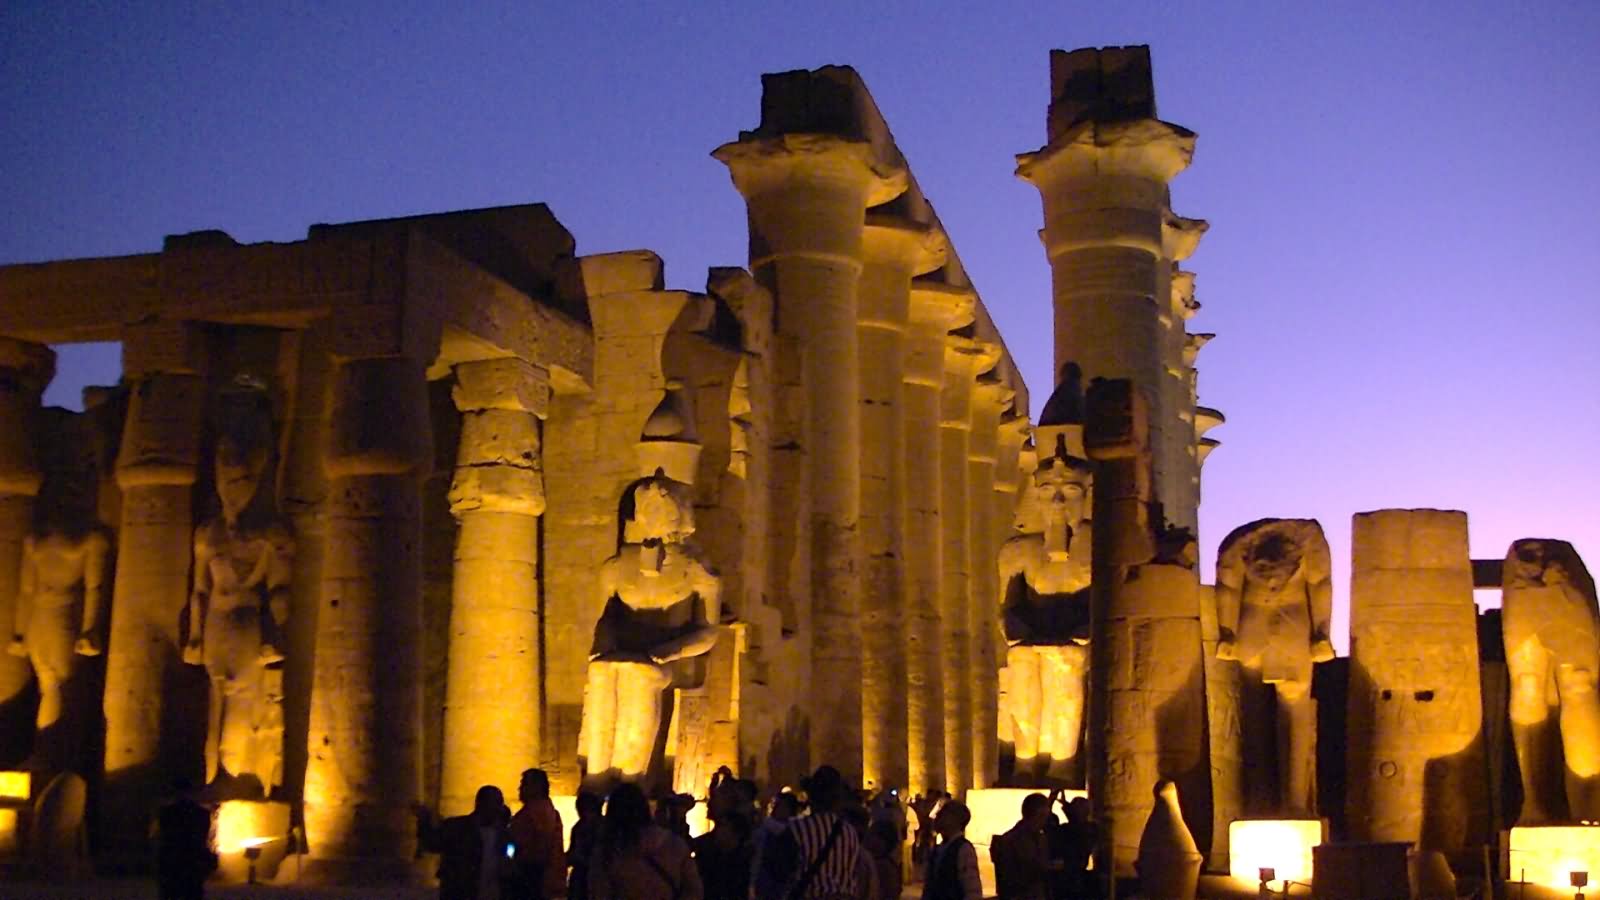 Adorable Night View Of The Luxor Temple, Egypt